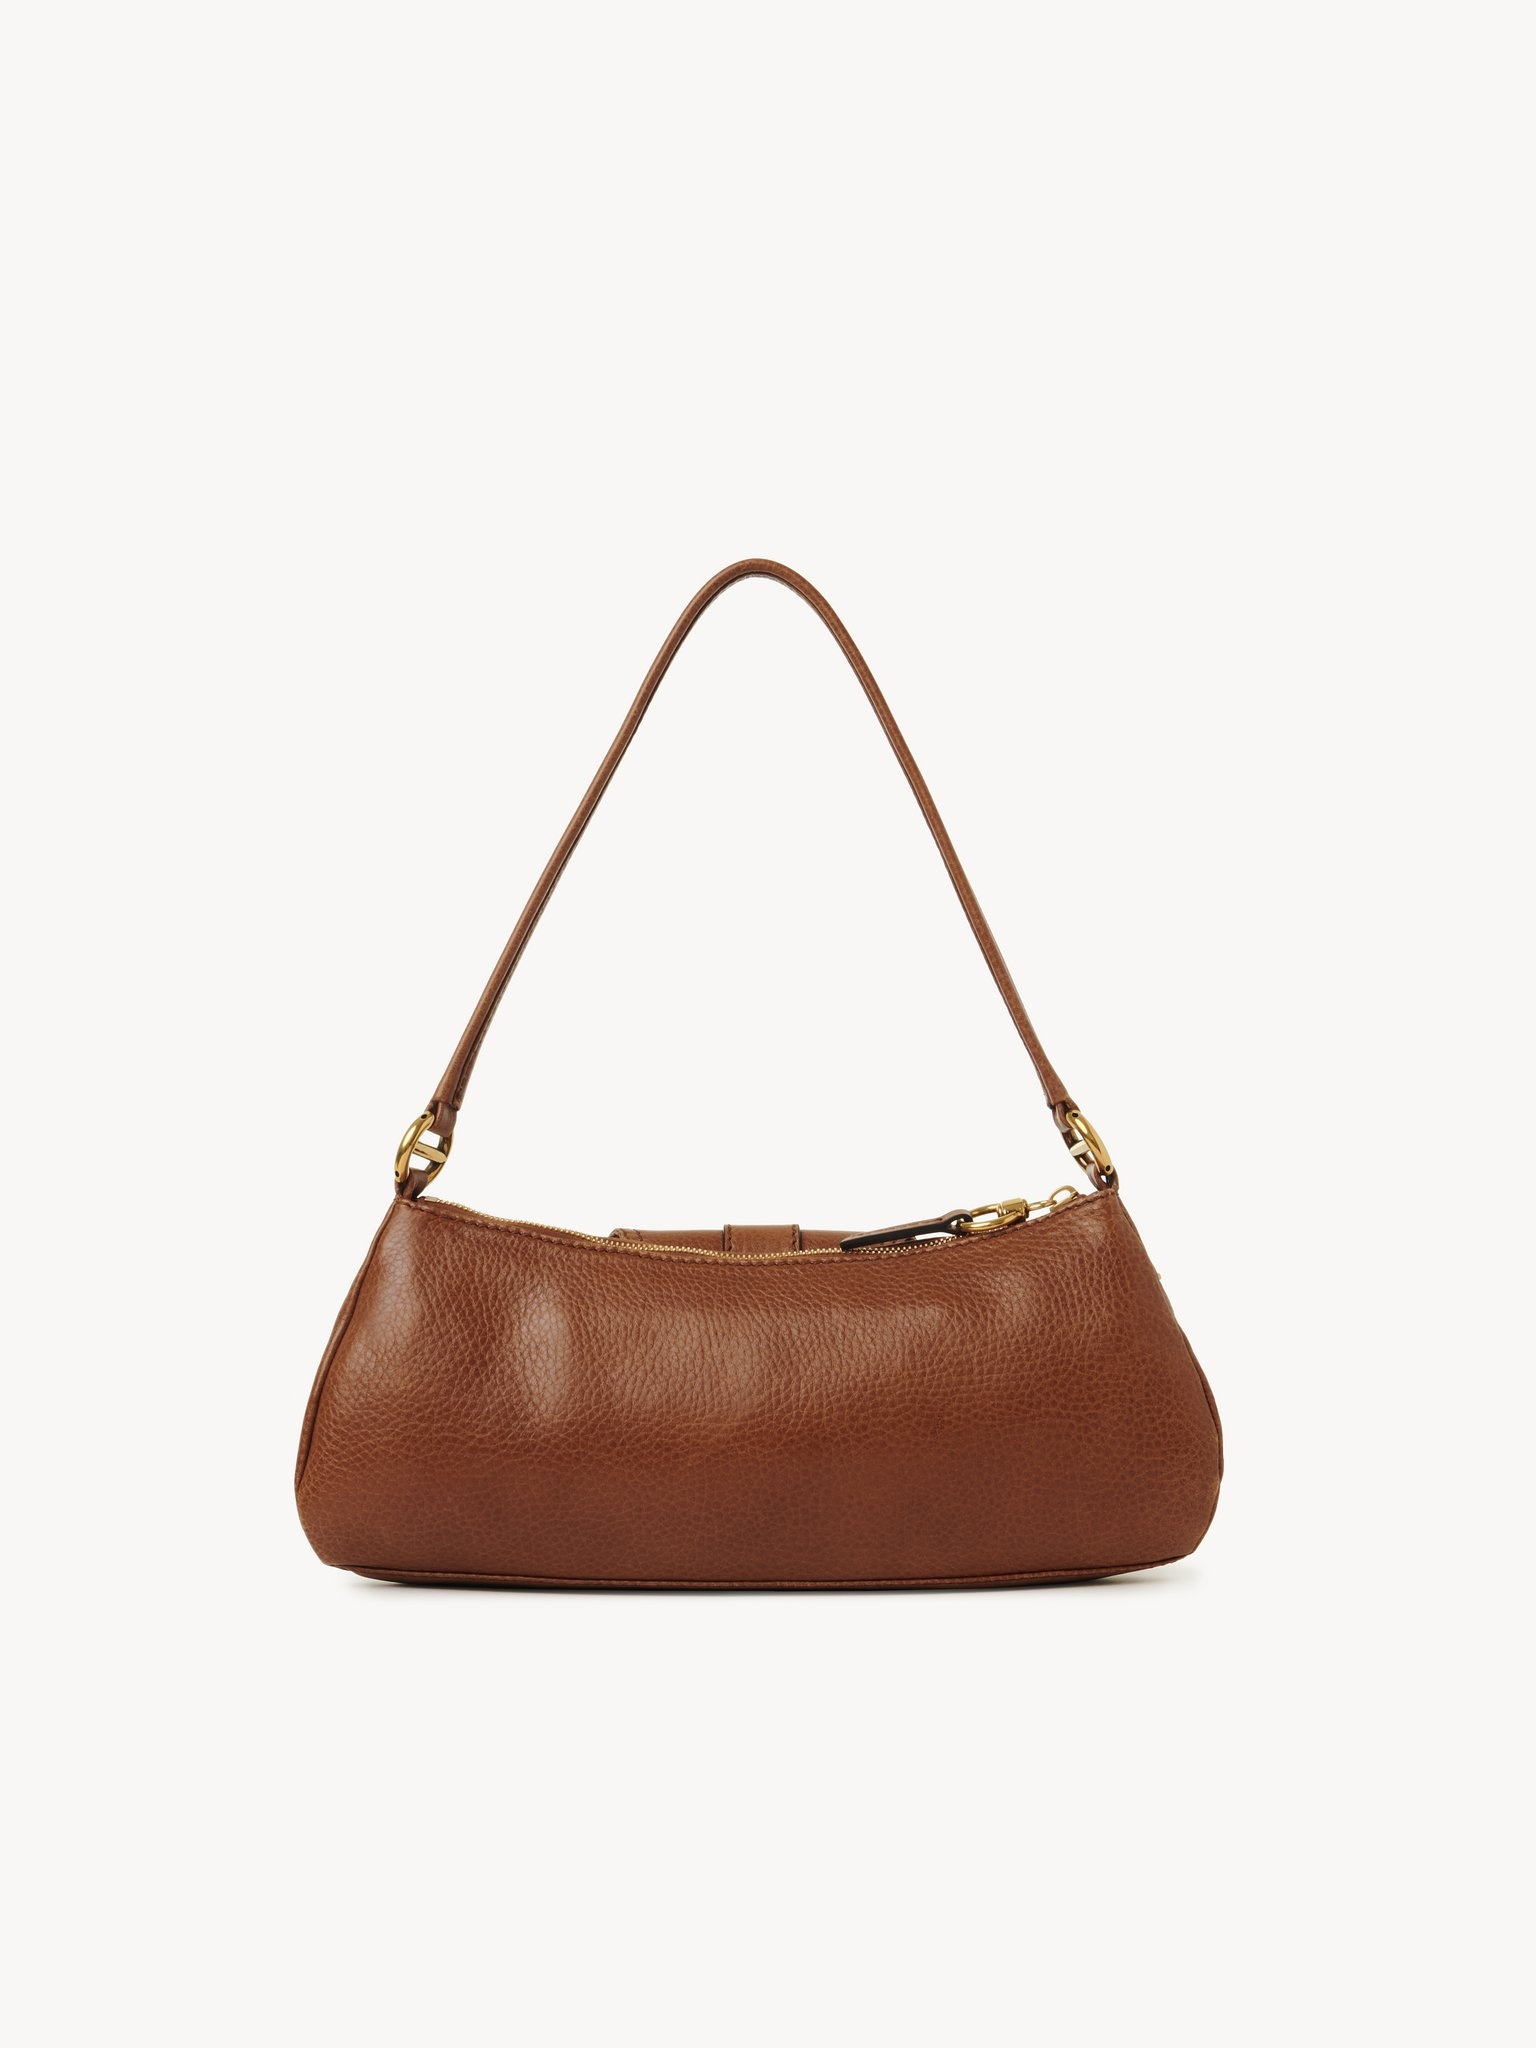 THE 99 SHOULDER BAG IN GRAINED LEATHER - 4